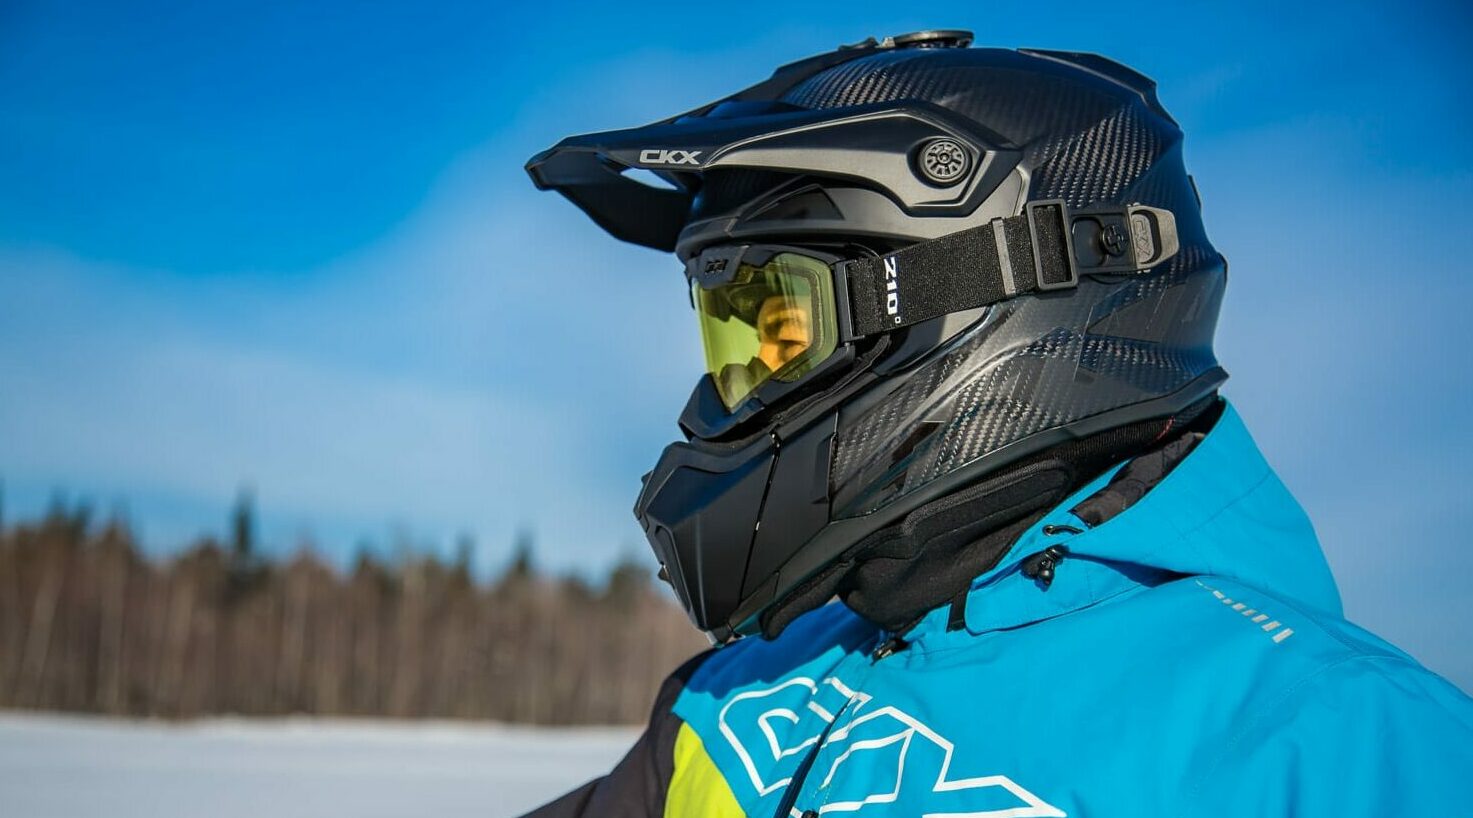 The Five things you need for winter riding